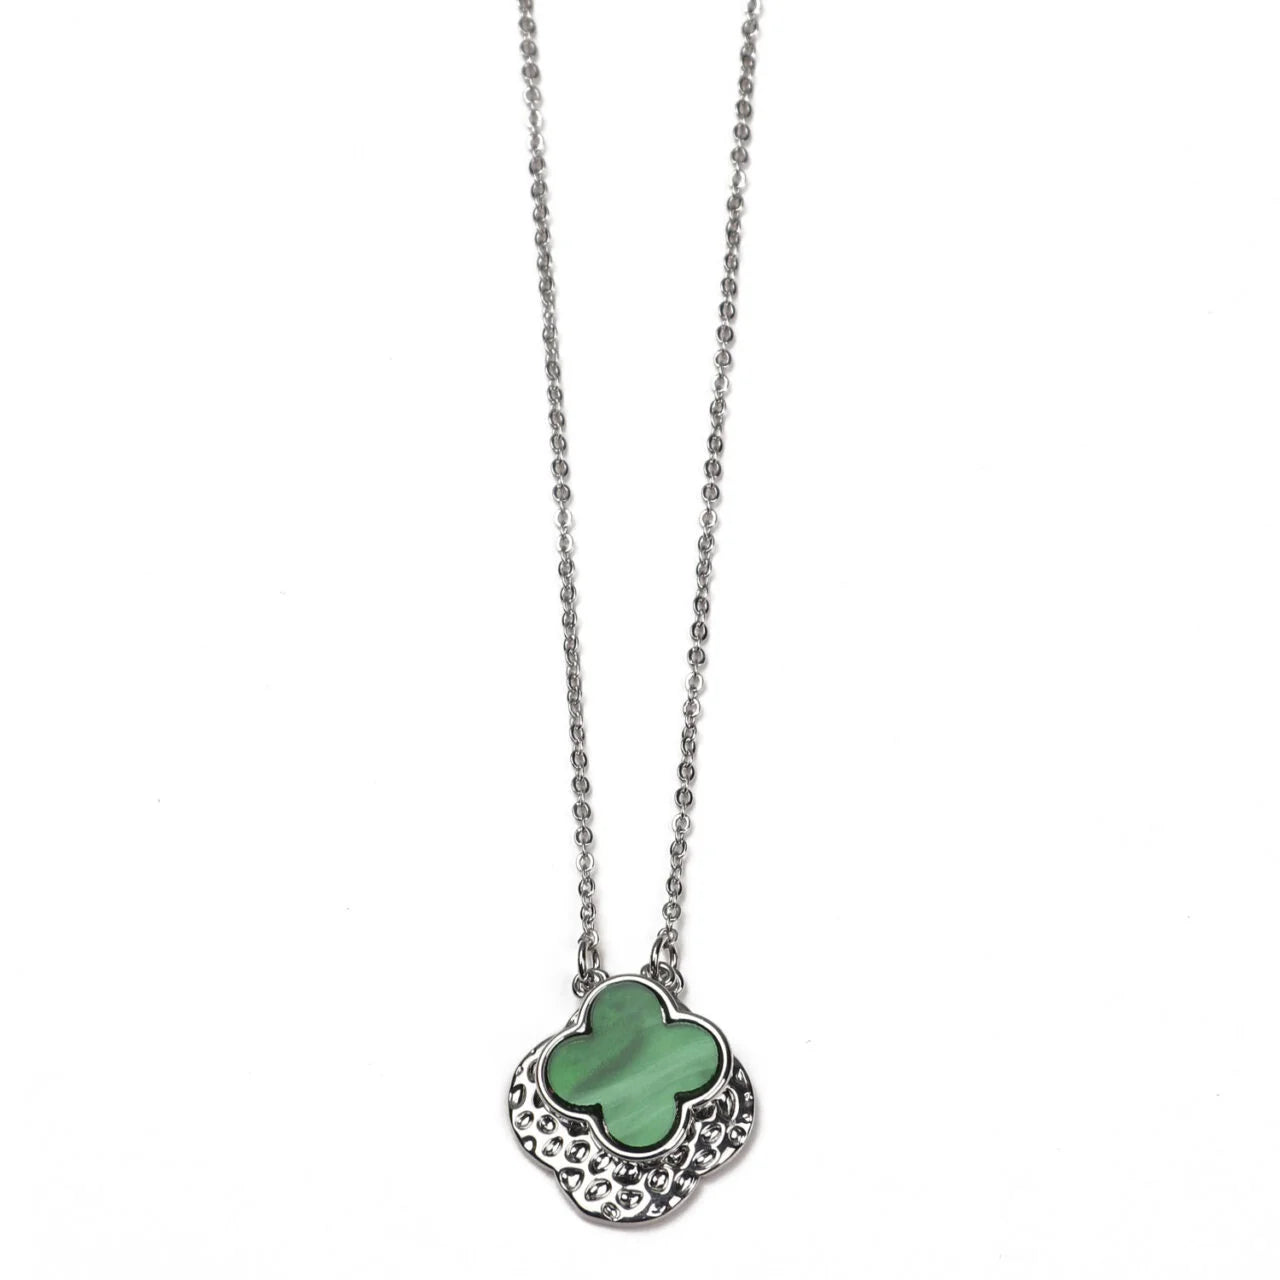 Fabulous Gifts Jewellery Necklace Double Clover Green Silver by Weirs of Baggot Street